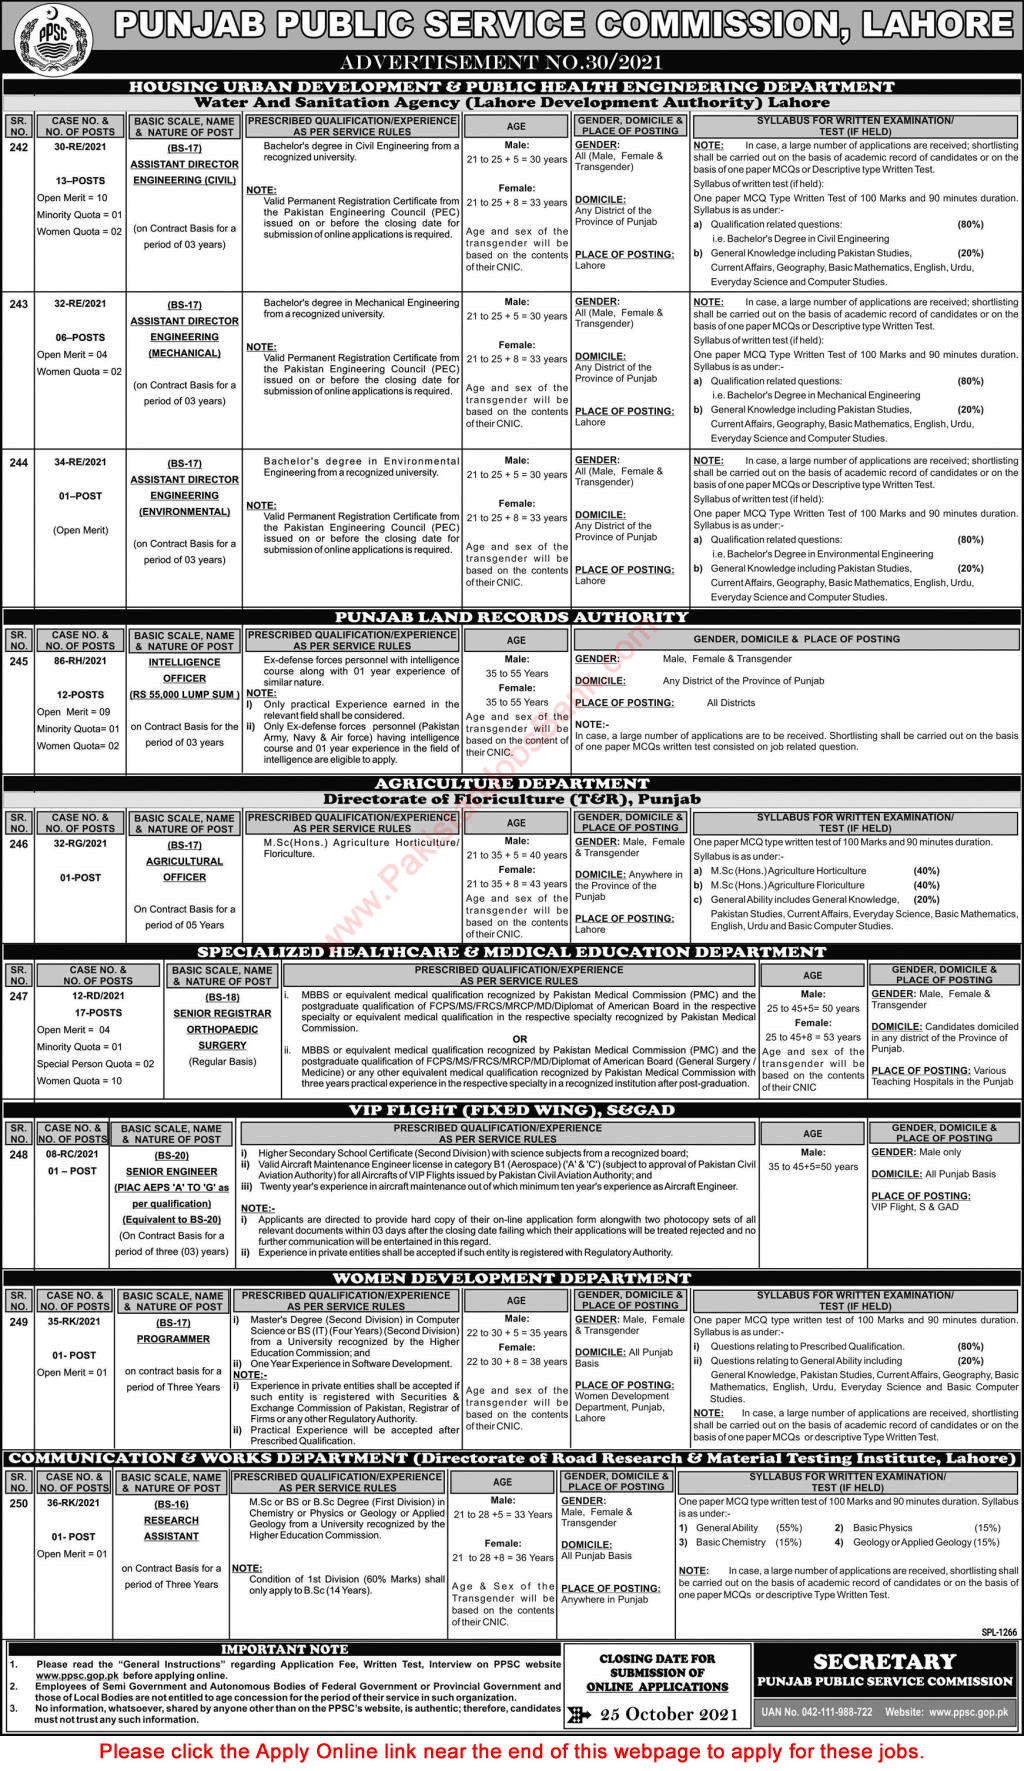 PPSC Jobs October 2021 Apply Online Consolidated Advertisement No 30/2021 Latest